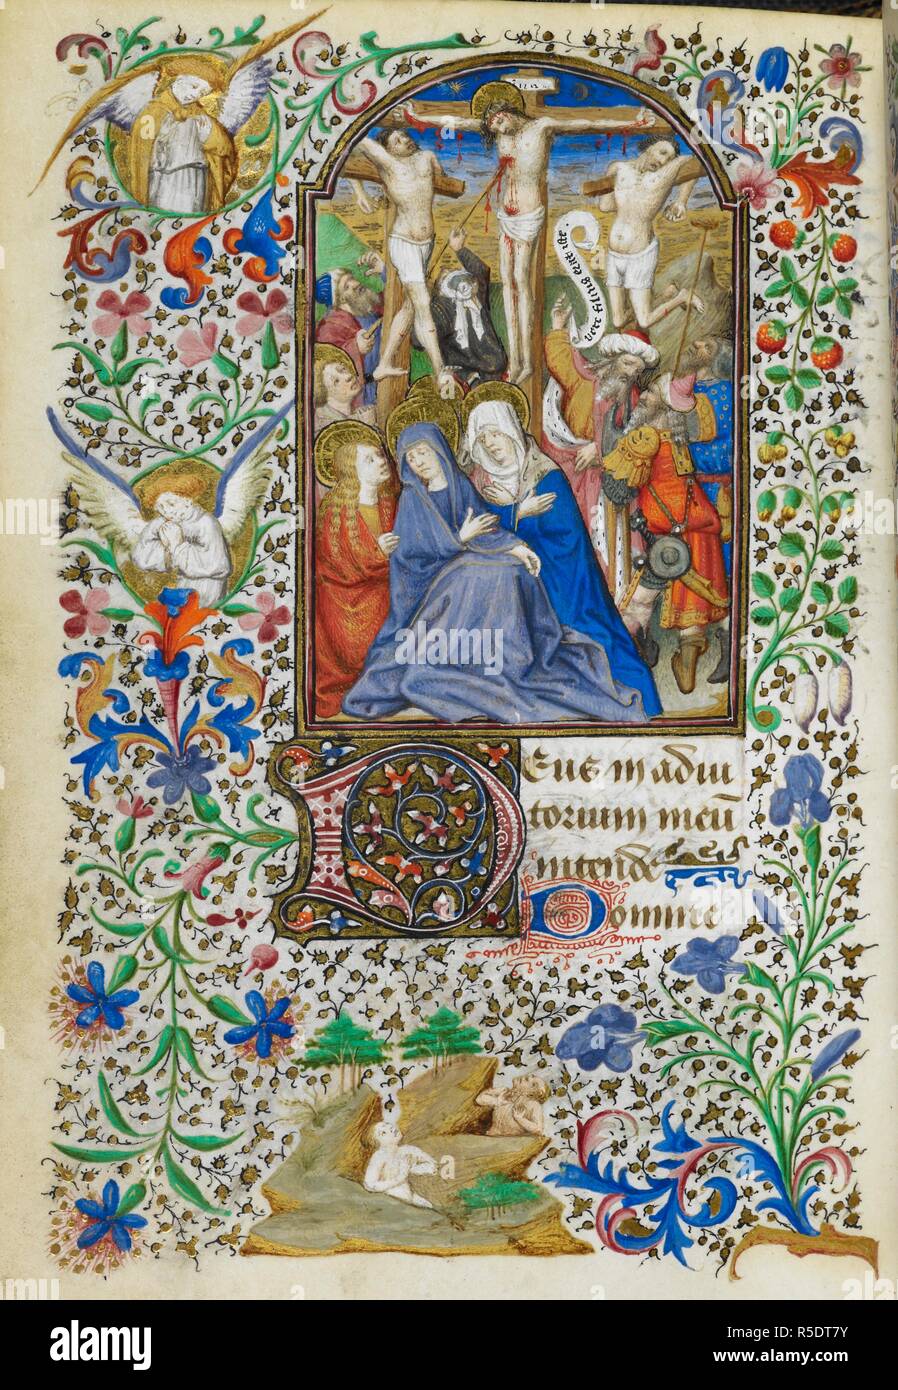 Miniature of the Crucifixion of Christ between the two thieves, with the Virgin and John the Evangelist at his feet, with a full foliate border including two weeping angels and two dead people rising from their graves, at the beginning of None of the Passion. Book of Hours, Use of Rome ('The Dunois Hours'). France, Central (Paris); c. 1440 - c. 1450 (after 1436). Source: Yates Thompson 3, f.142v. Language: Latin, with a French calendar. Stock Photo